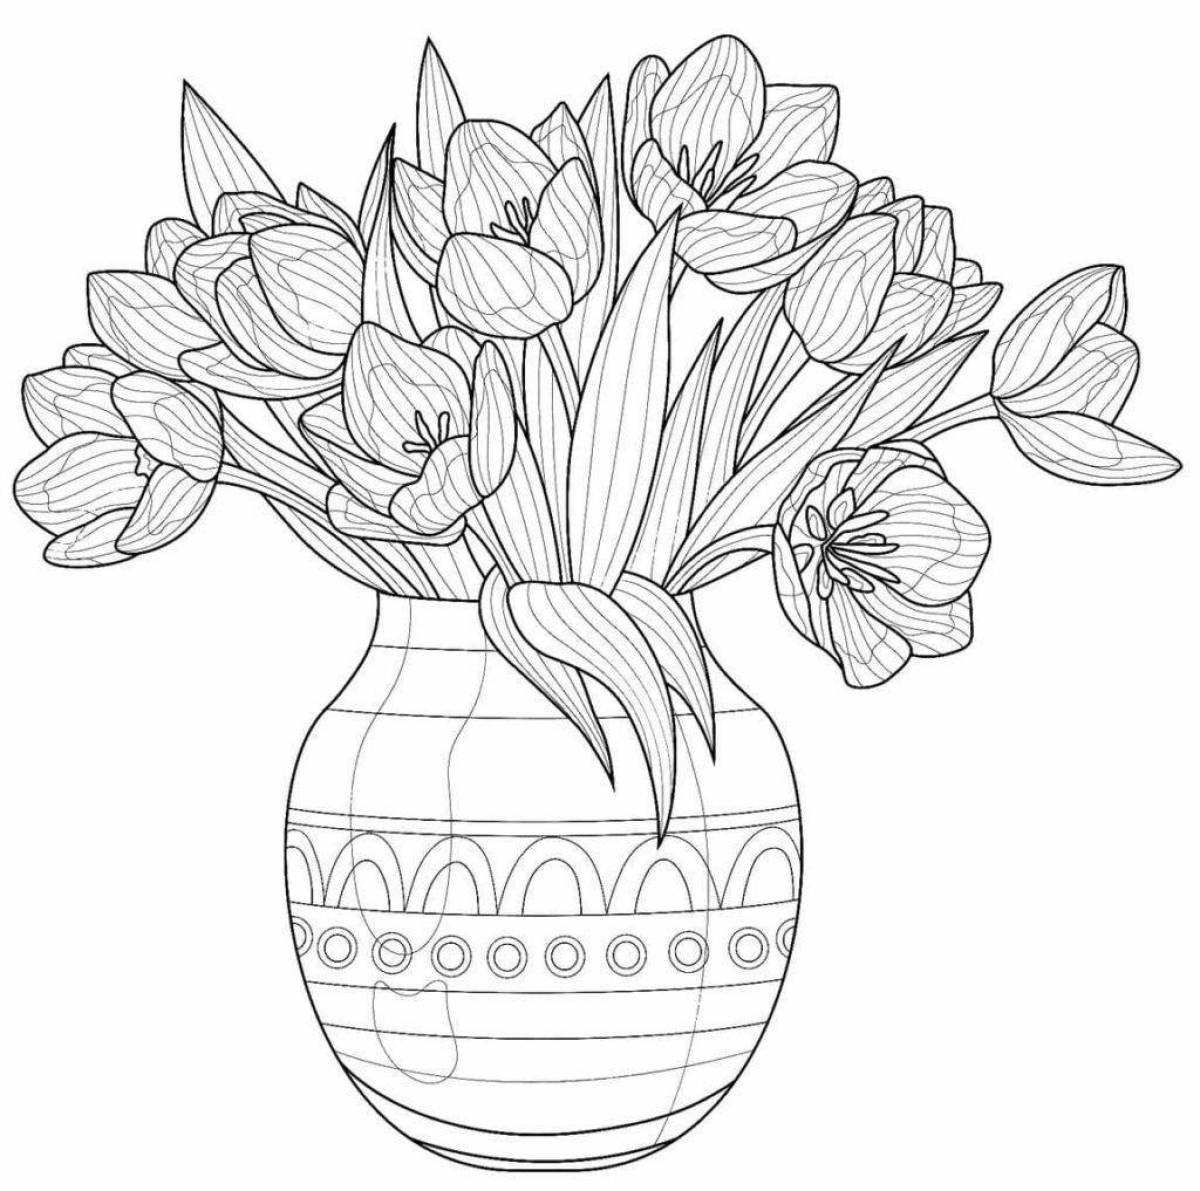 Colouring gorgeous big flowers in a vase